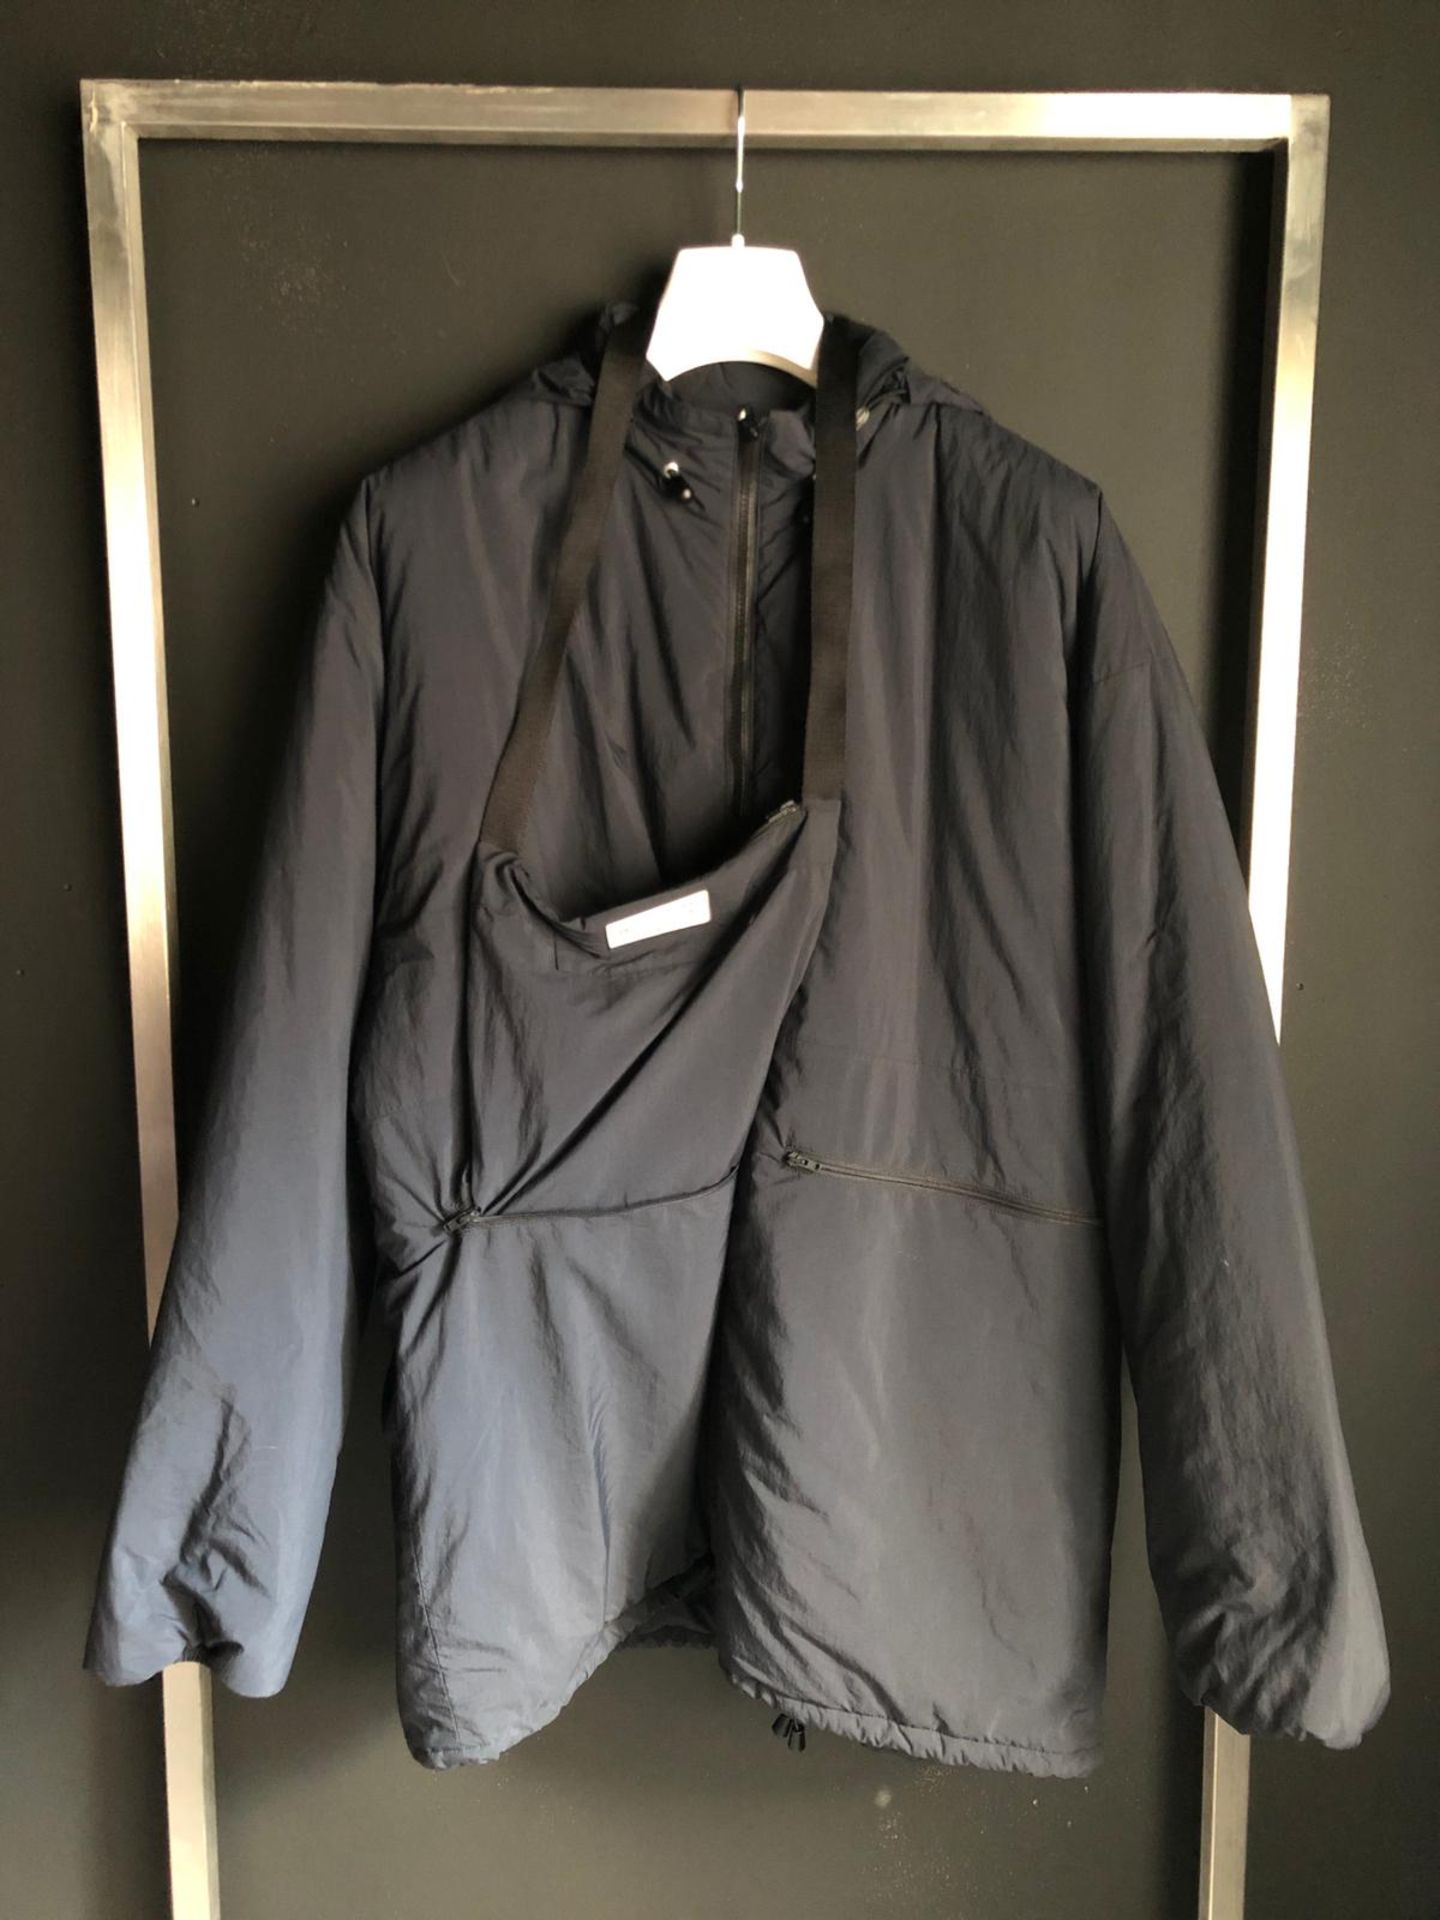 NEW WITH LABELS LARGE MAISON MARGIELLA WATERPROOF JACKET RRP £1165